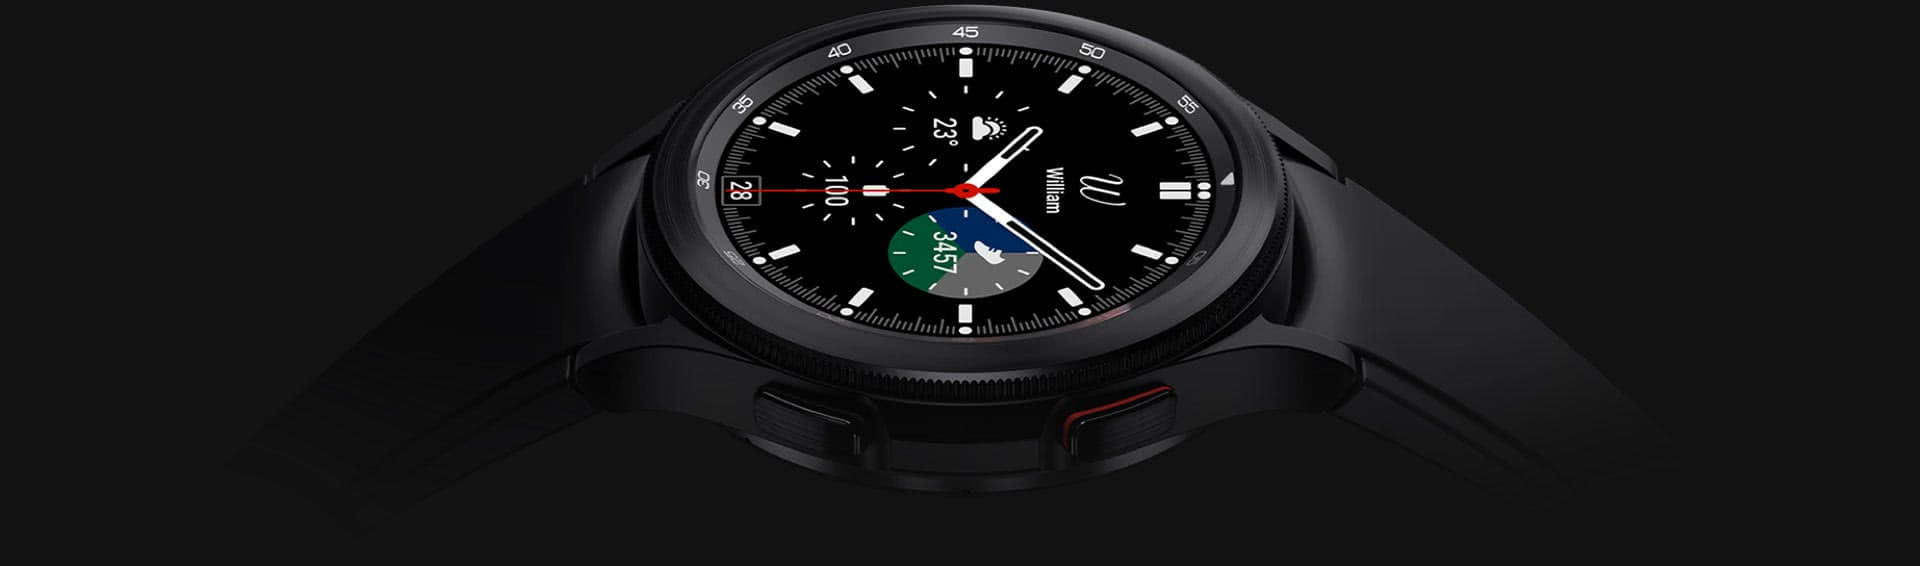 galaxy watch4 classic black design your own